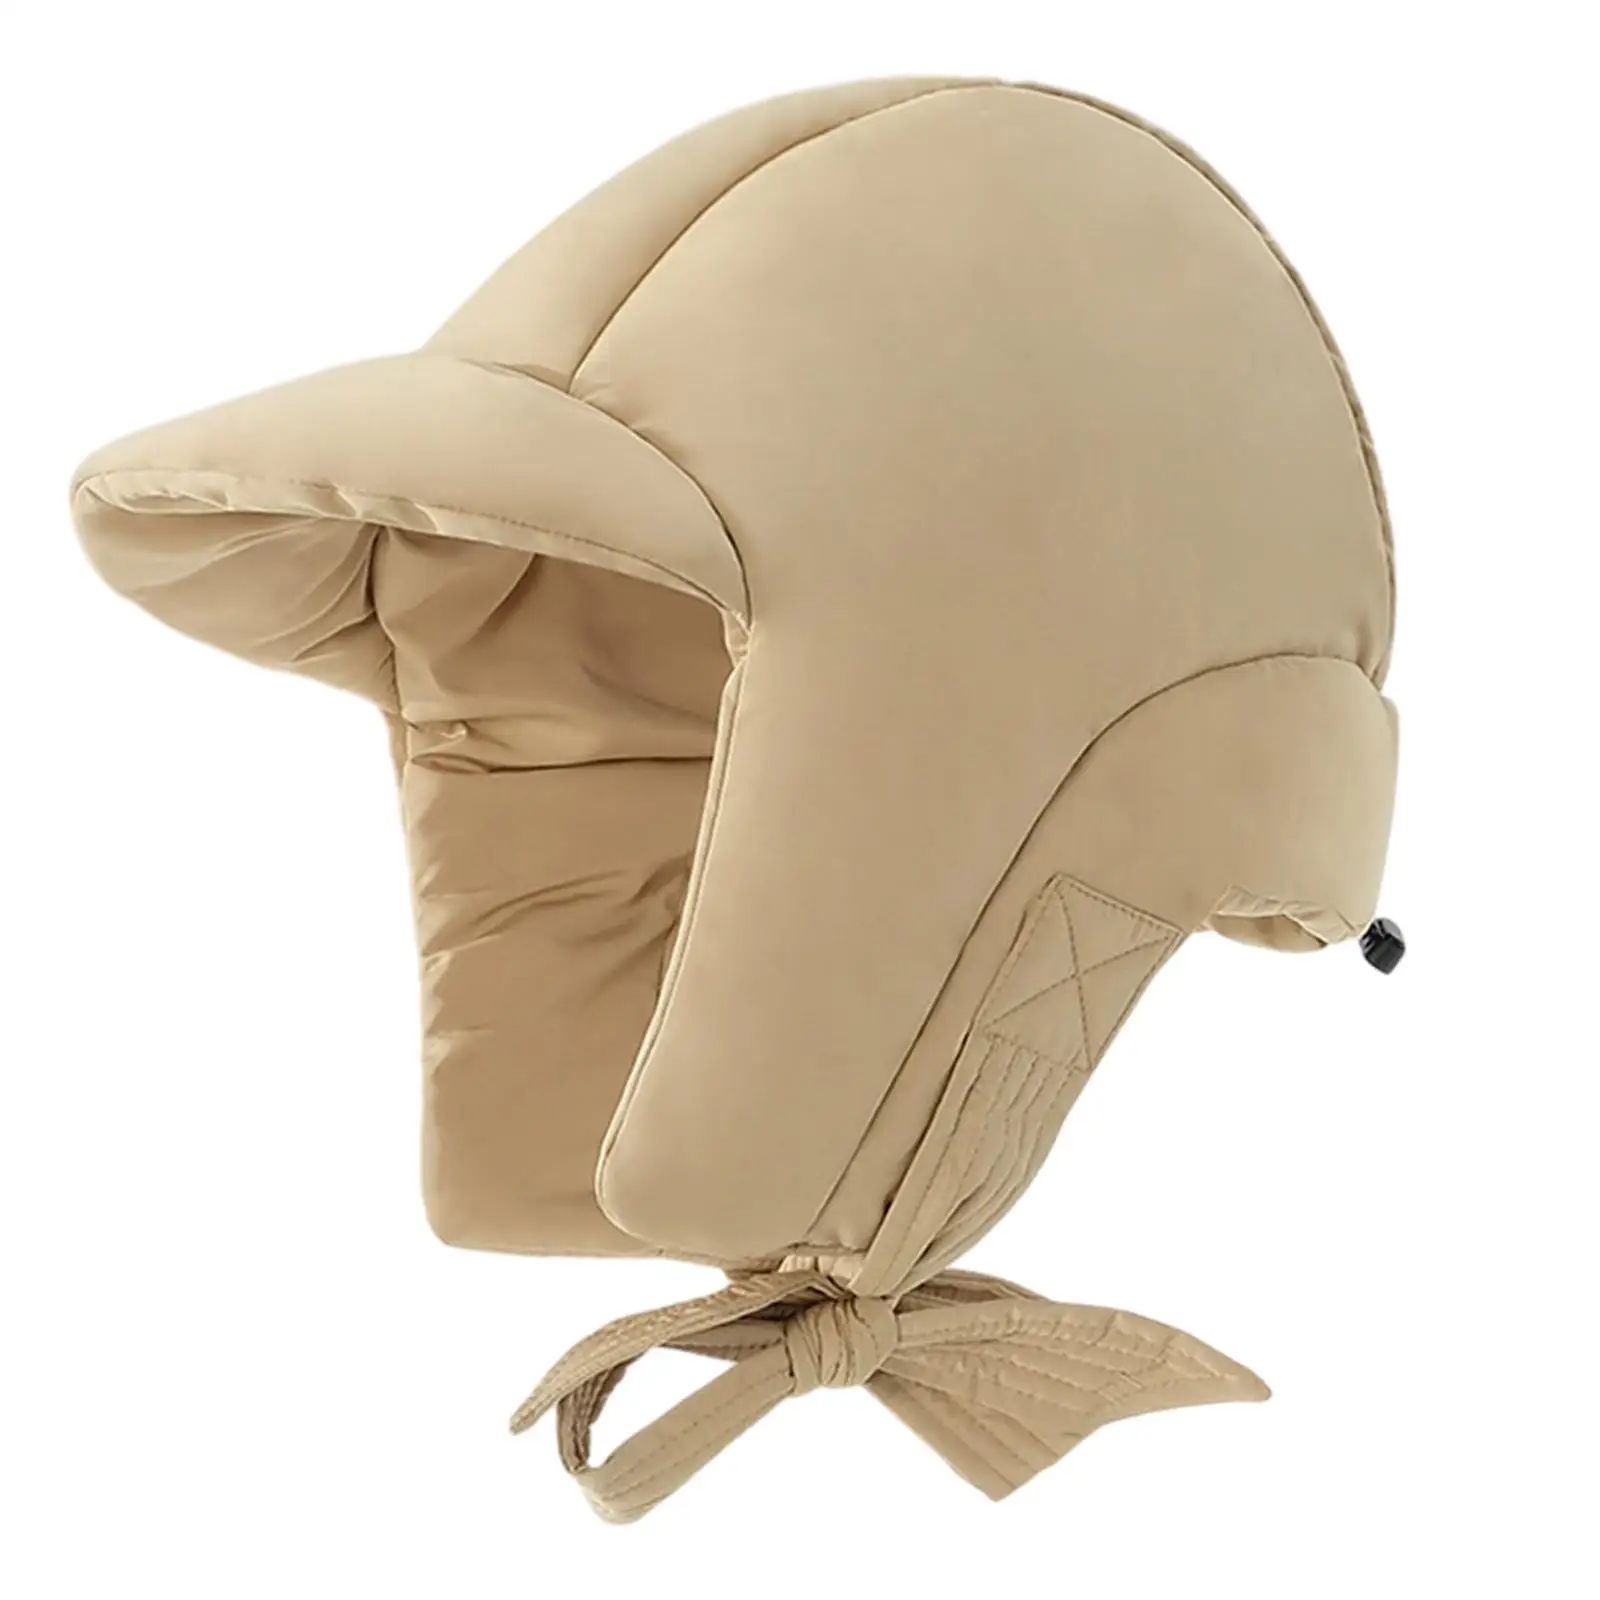 Down Hat with Earflaps Warm Hat with Peak Comfortable Trapper Hat Baseball Cap